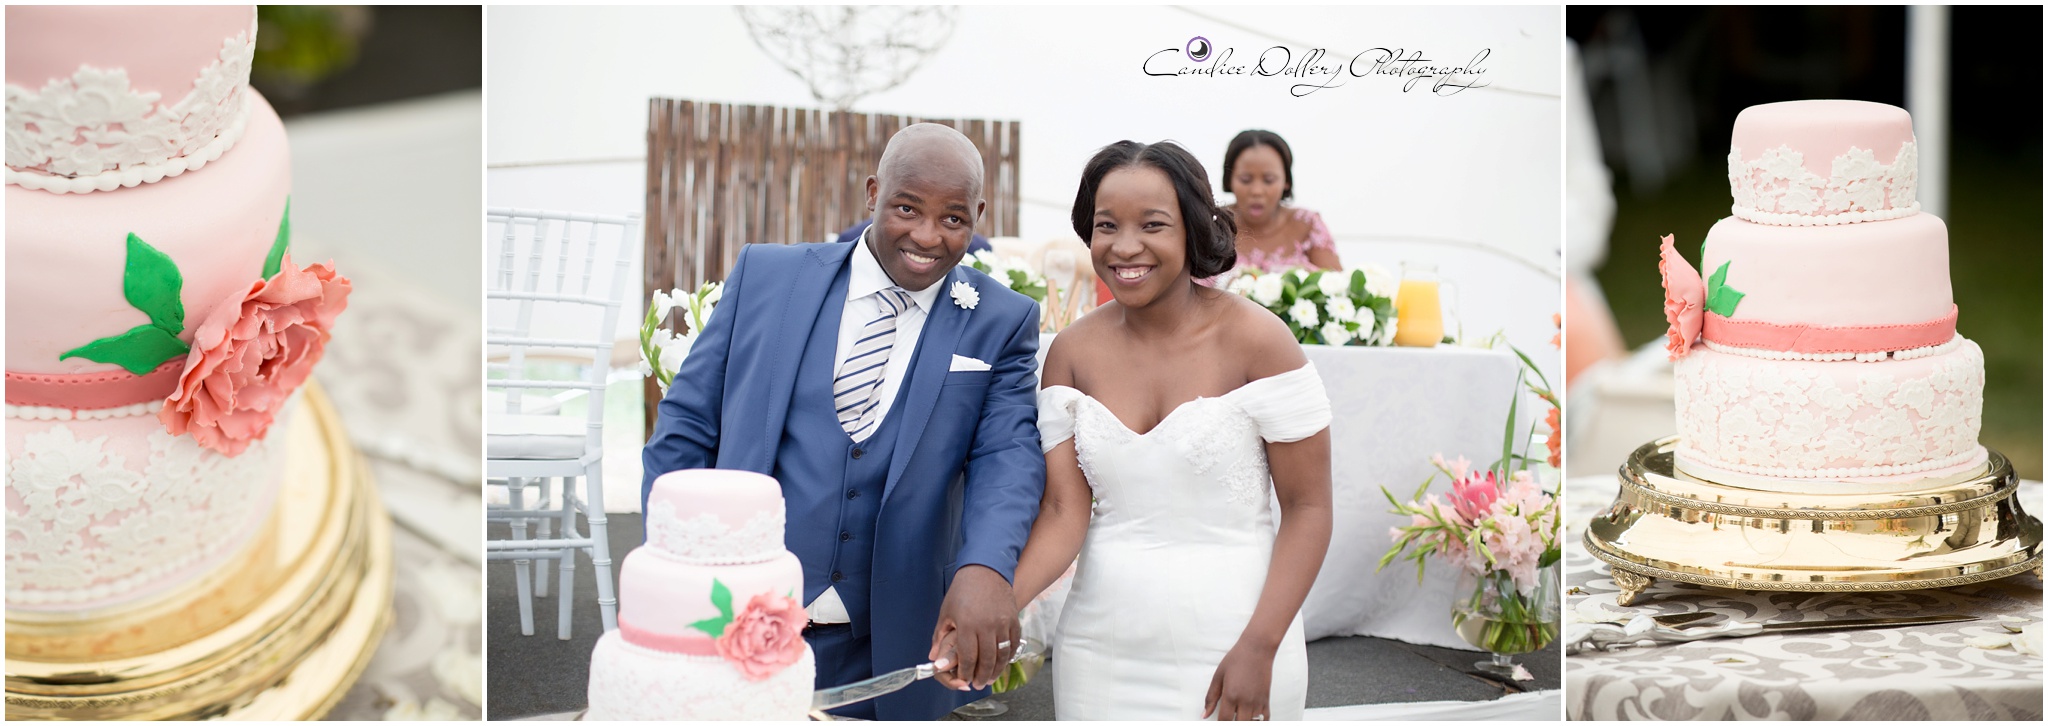 Thembi & Sabelo's Wedding - Candice Dollery Photography_8335